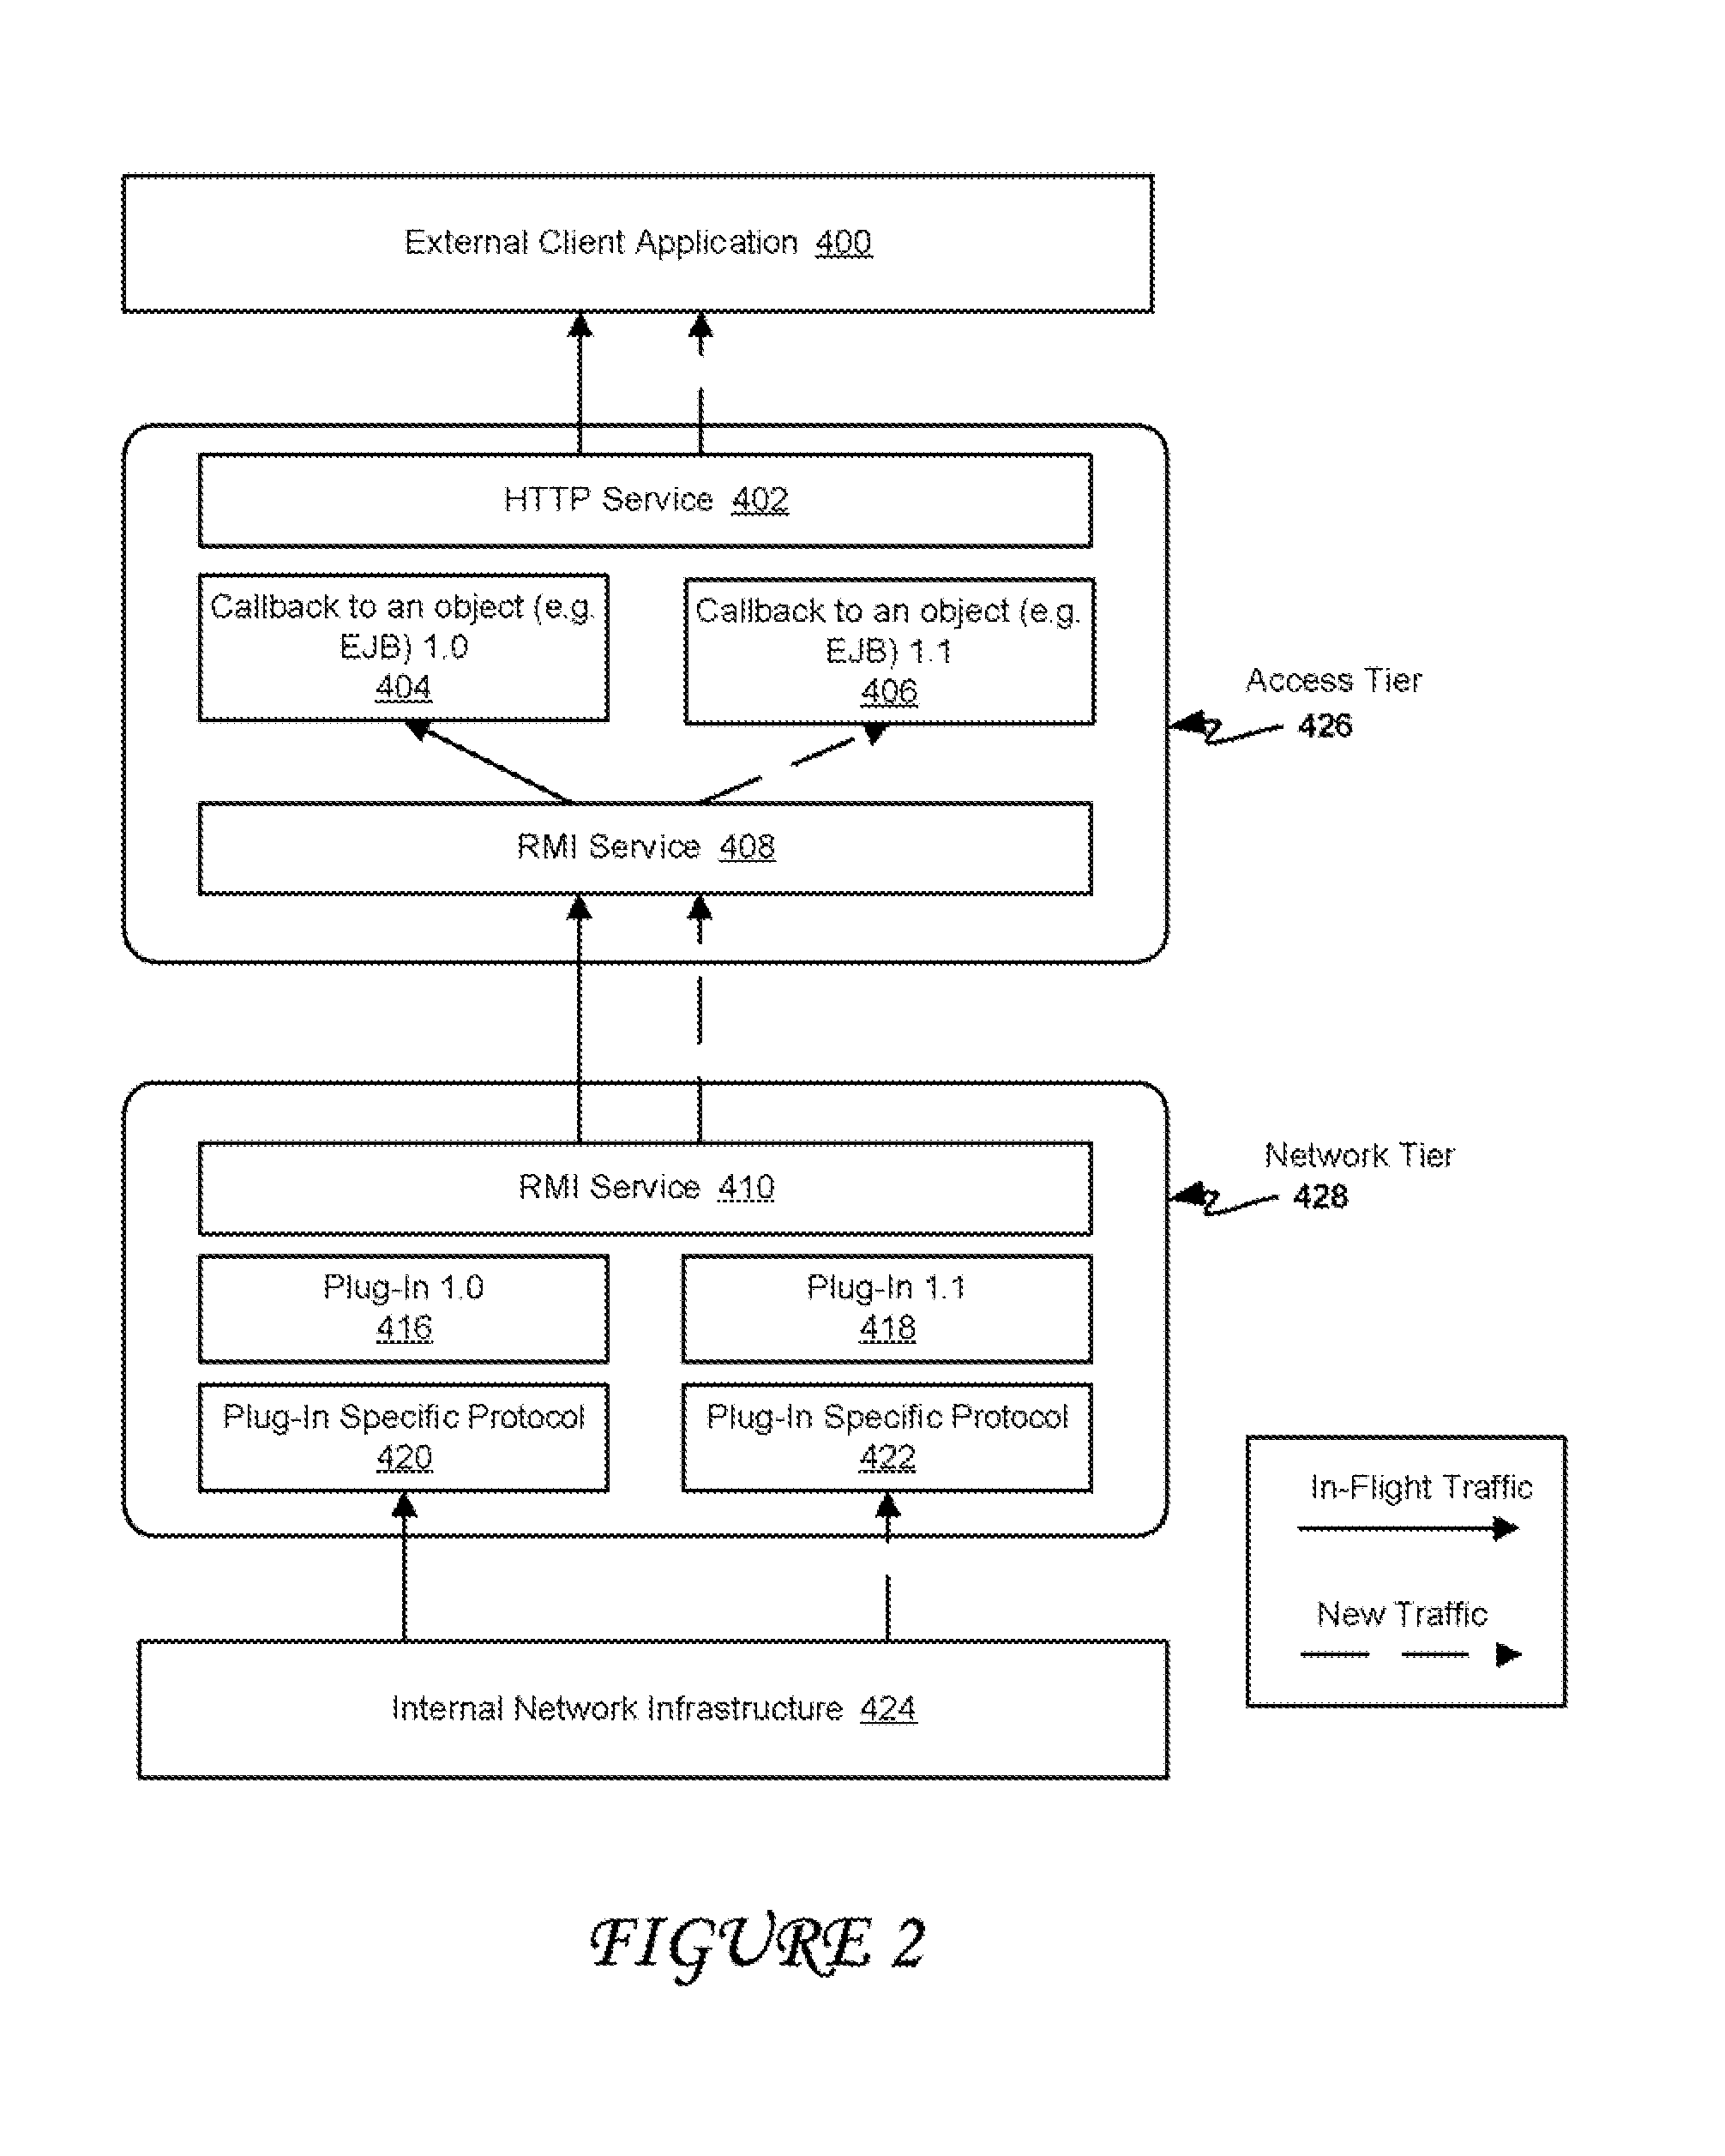 System and method for providing a production upgrade of components within a multiprotocol gateway